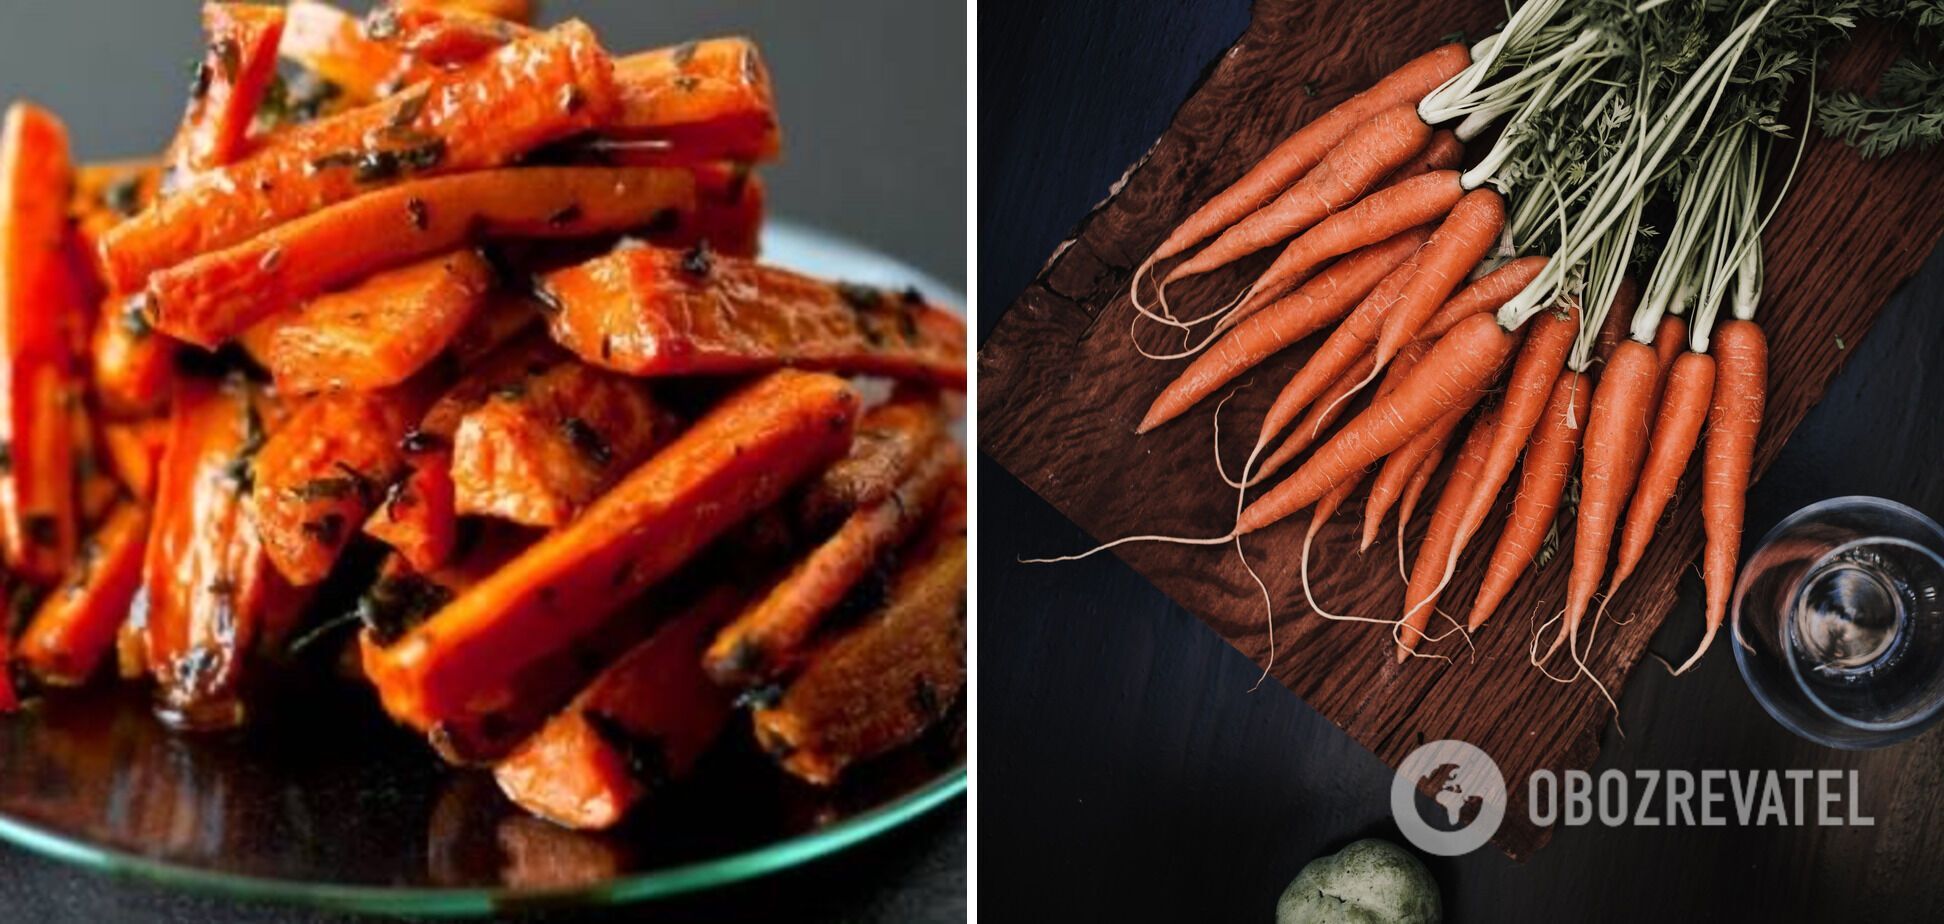 How to make a delicious side dish from carrots